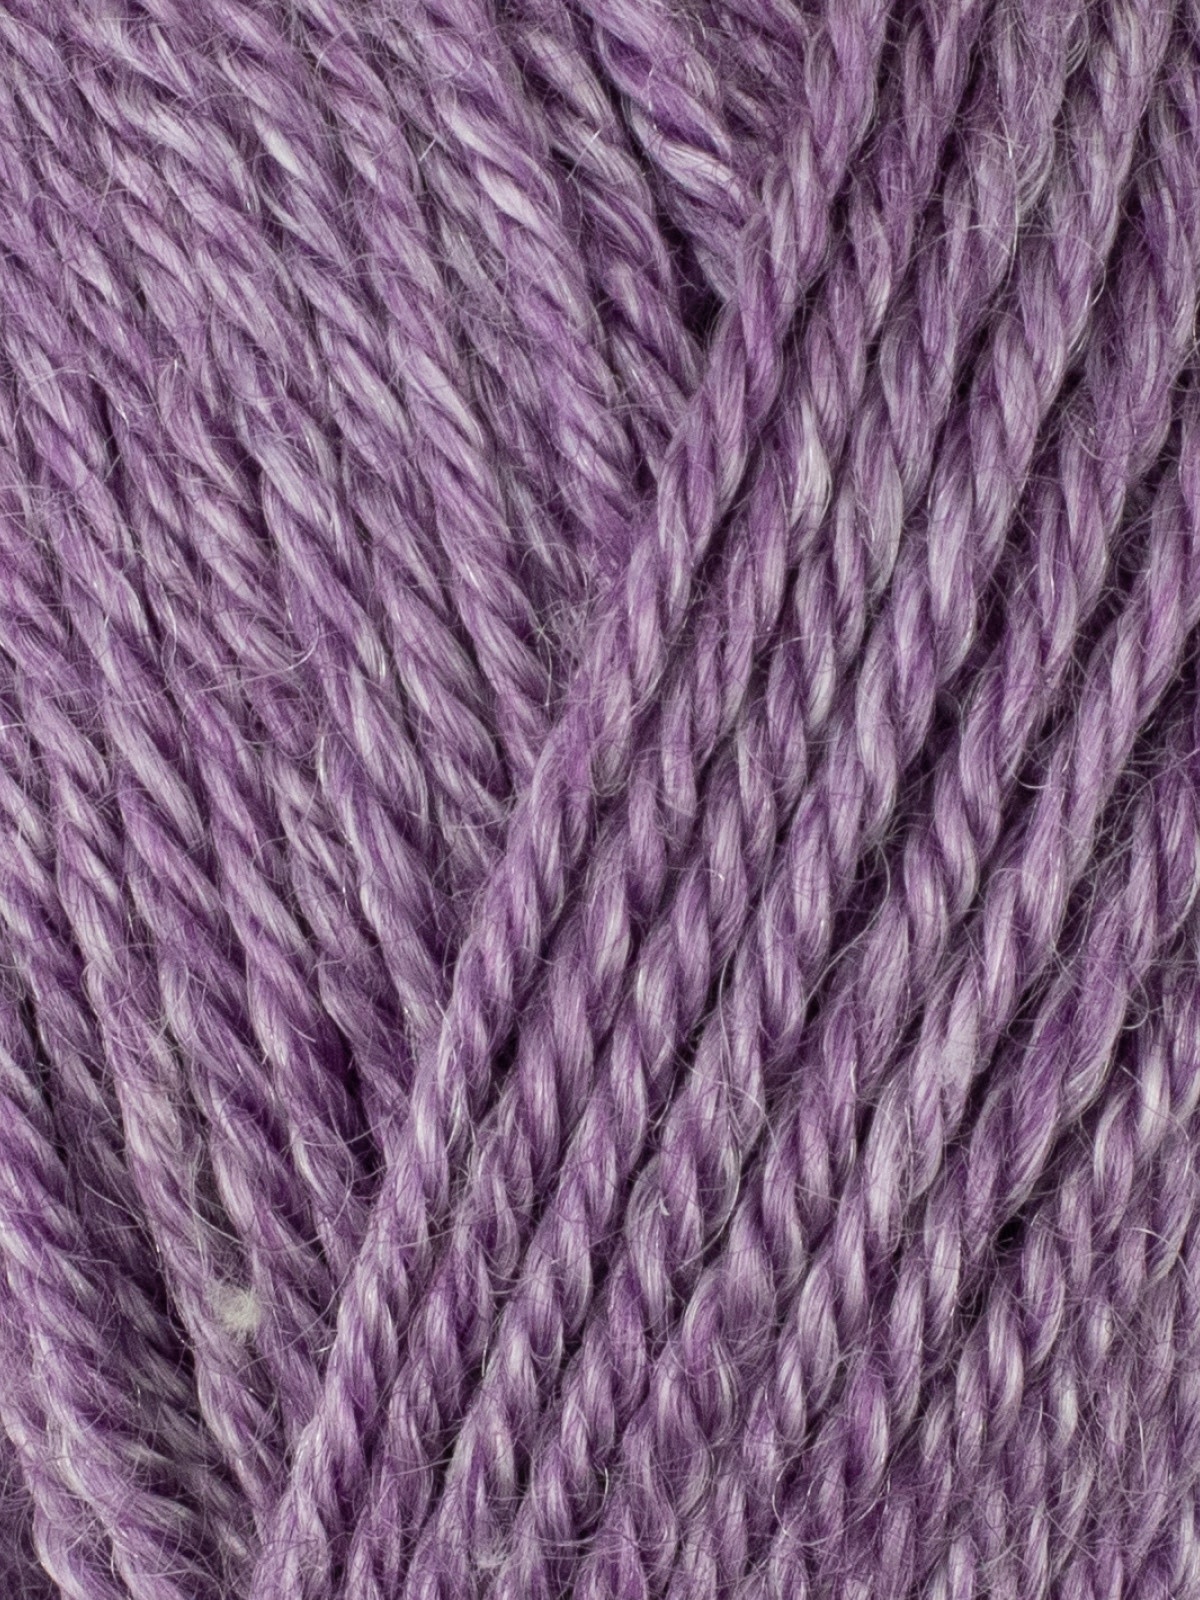 West Yorkshire Spinners WYS Elements DK 1144 FRENCH LAVENDER